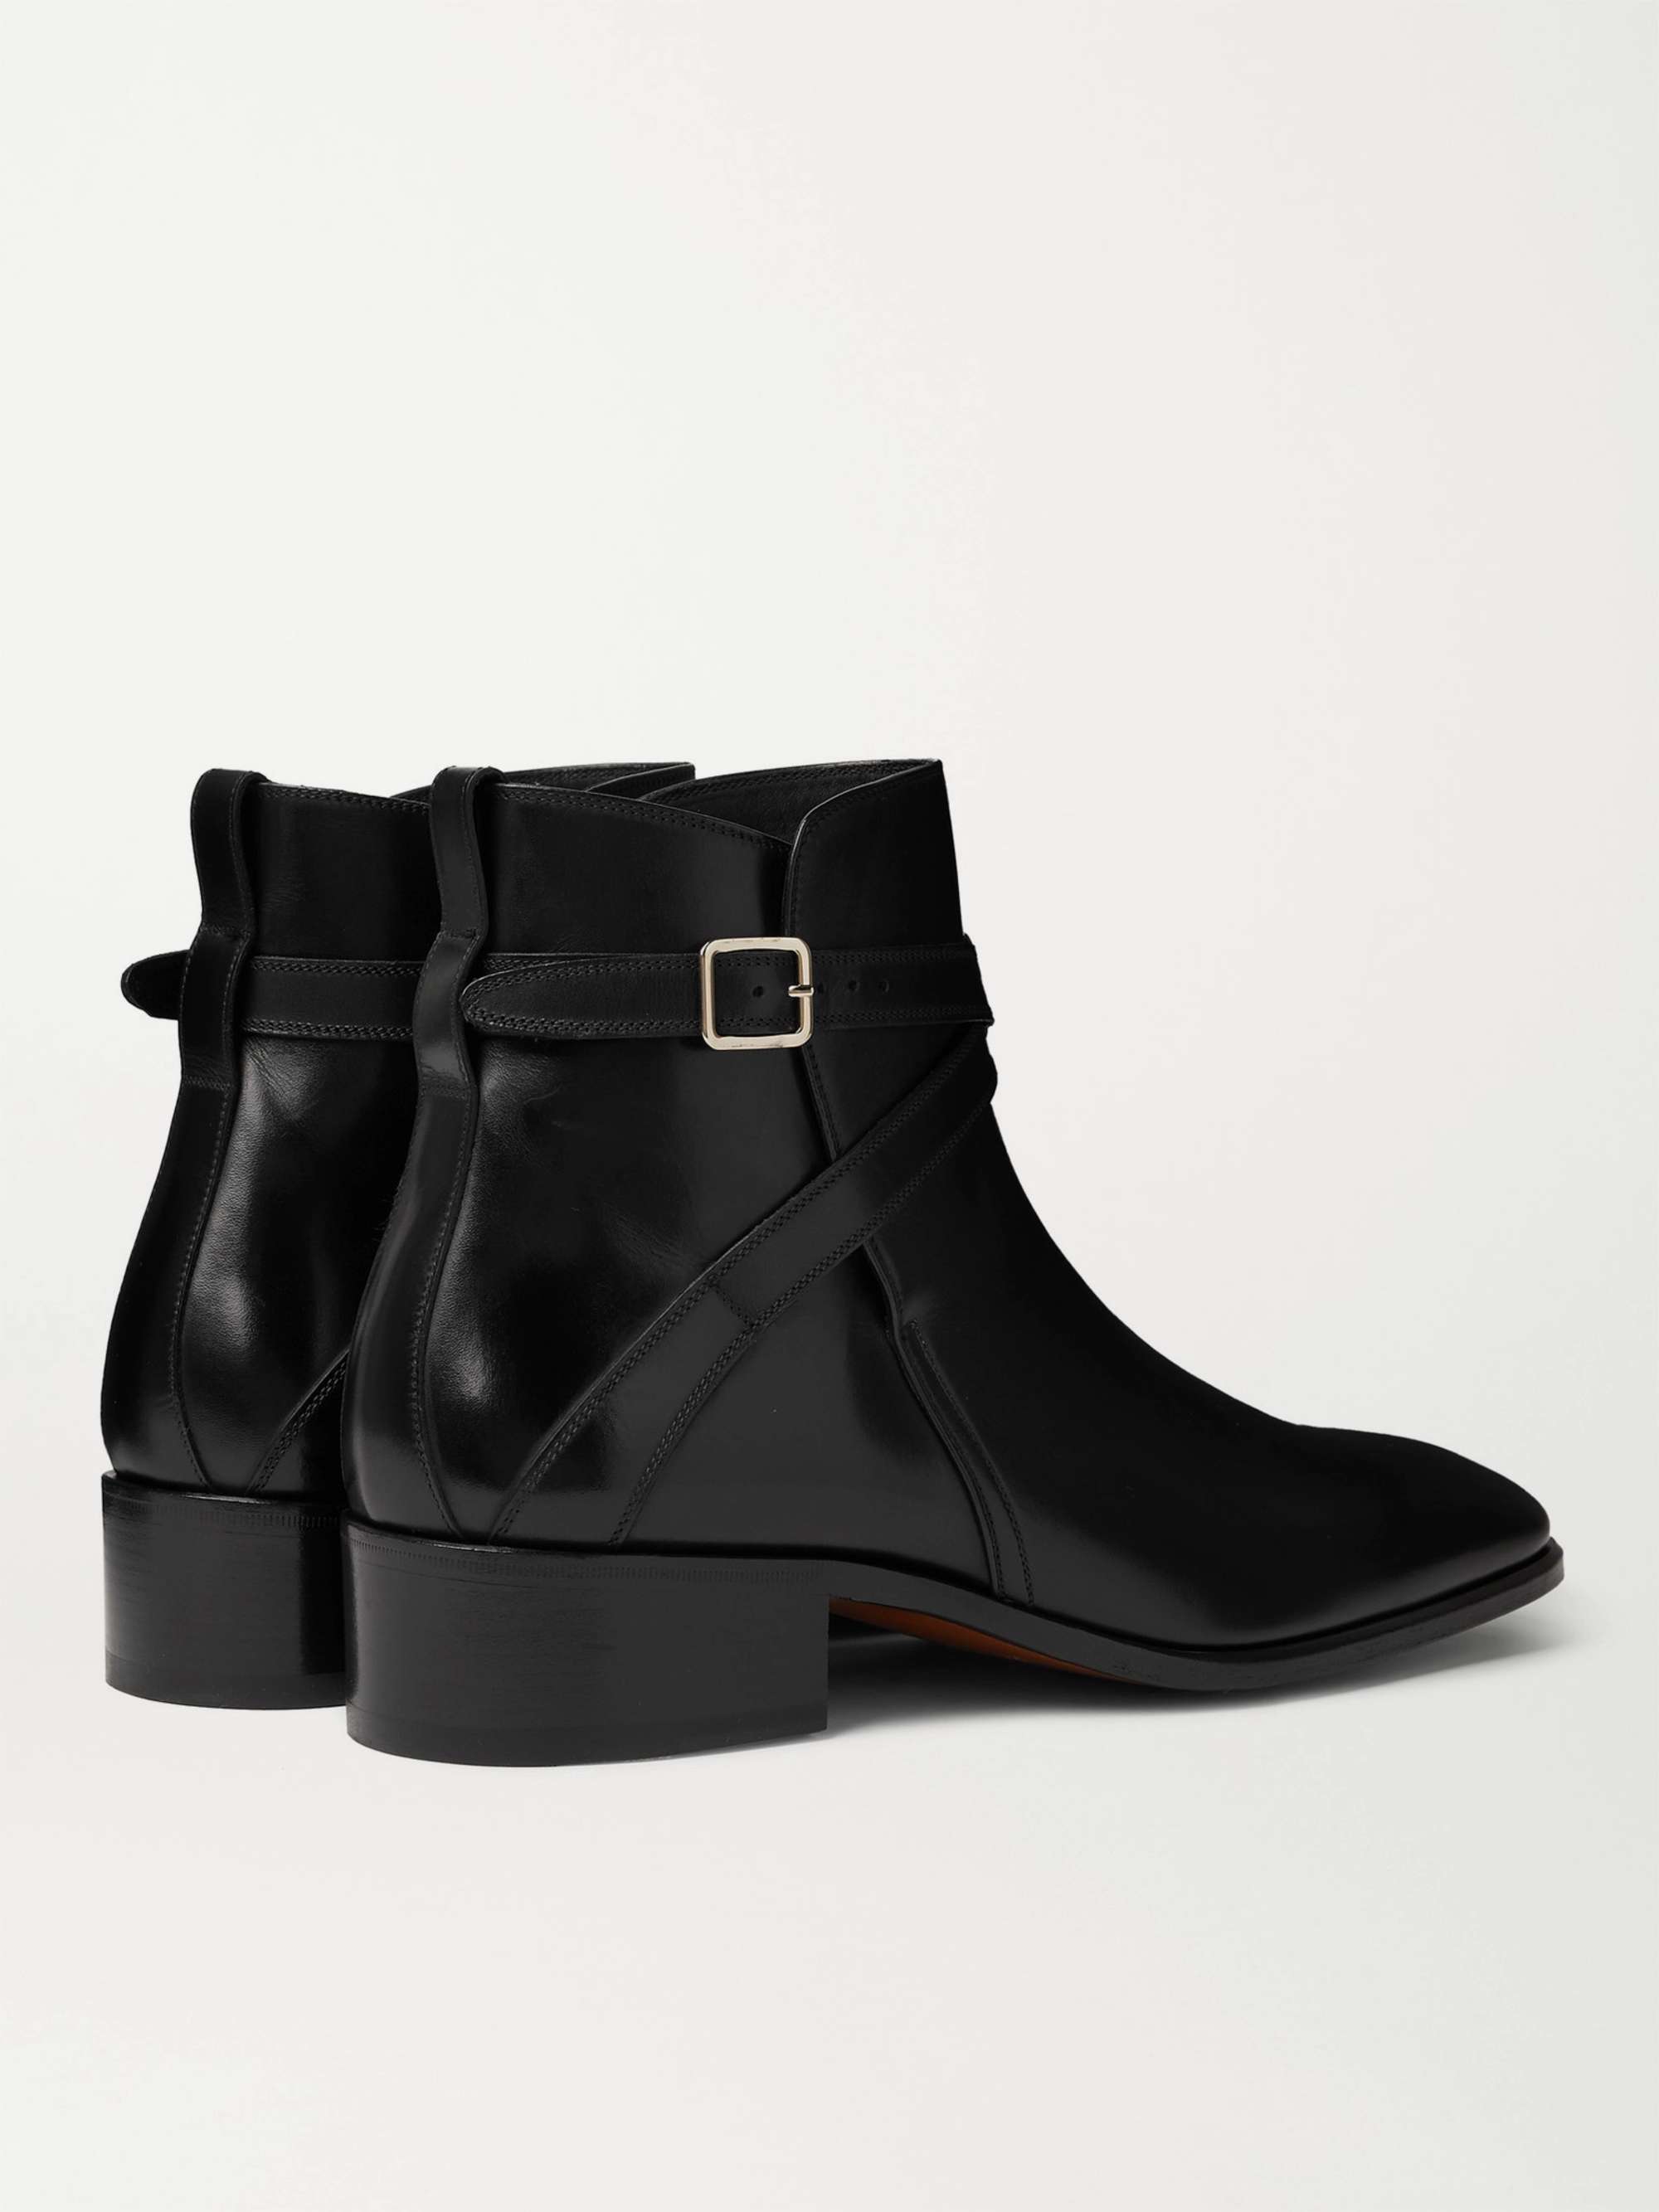 TOM FORD Rochester Leather Chelsea Boots